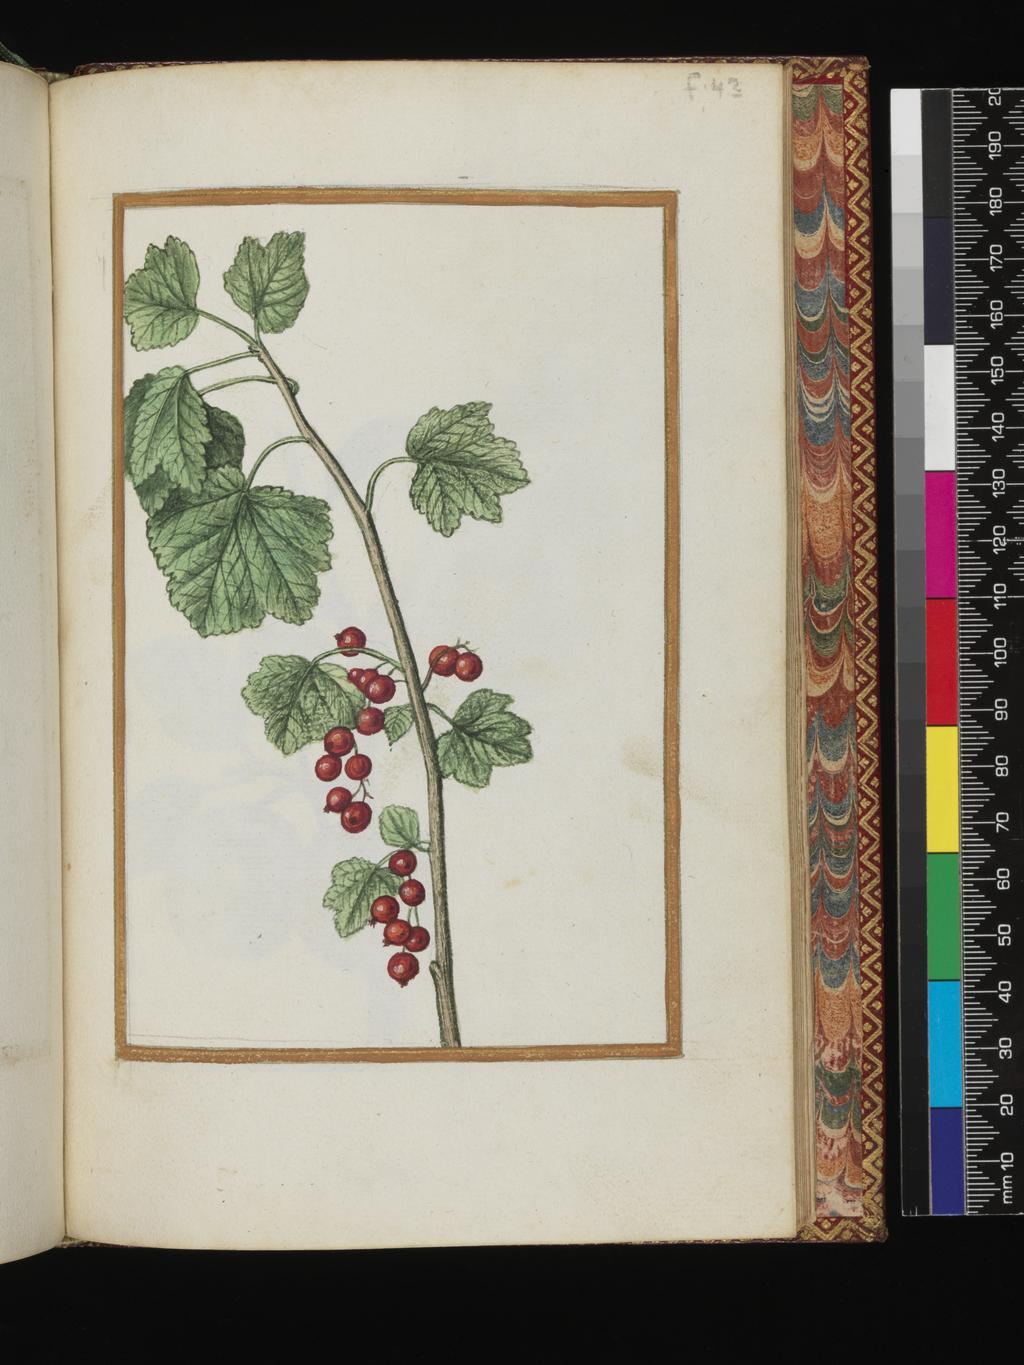 An image of Red currant. Album containing a dedicatory sonnet and 48 drawings. Pinet, Antoine du (French, op. c. 1584). Each of the drawings is framed by a border of gold paint of varying size according to the depth of the painted area. The drawings on white laid paper, watermarked with a bunch of grapes are bound into an album with a contemporary gold-tooled limp vellum cover bearing the arms, recto and verso of Louise of Lorraine (1553-1601). This, in turn, is bound into an eighteenth century French red morocco gilt binding. The spine is lettered in gold (see 'inscriptions/marks'). Each of the drawings is framed by a border of gold paint of varying size according to the depth of the painted area. Blank ff not detailed elsewhere. Height, sheet size, 204 mm, width, sheet size, 139 mm.